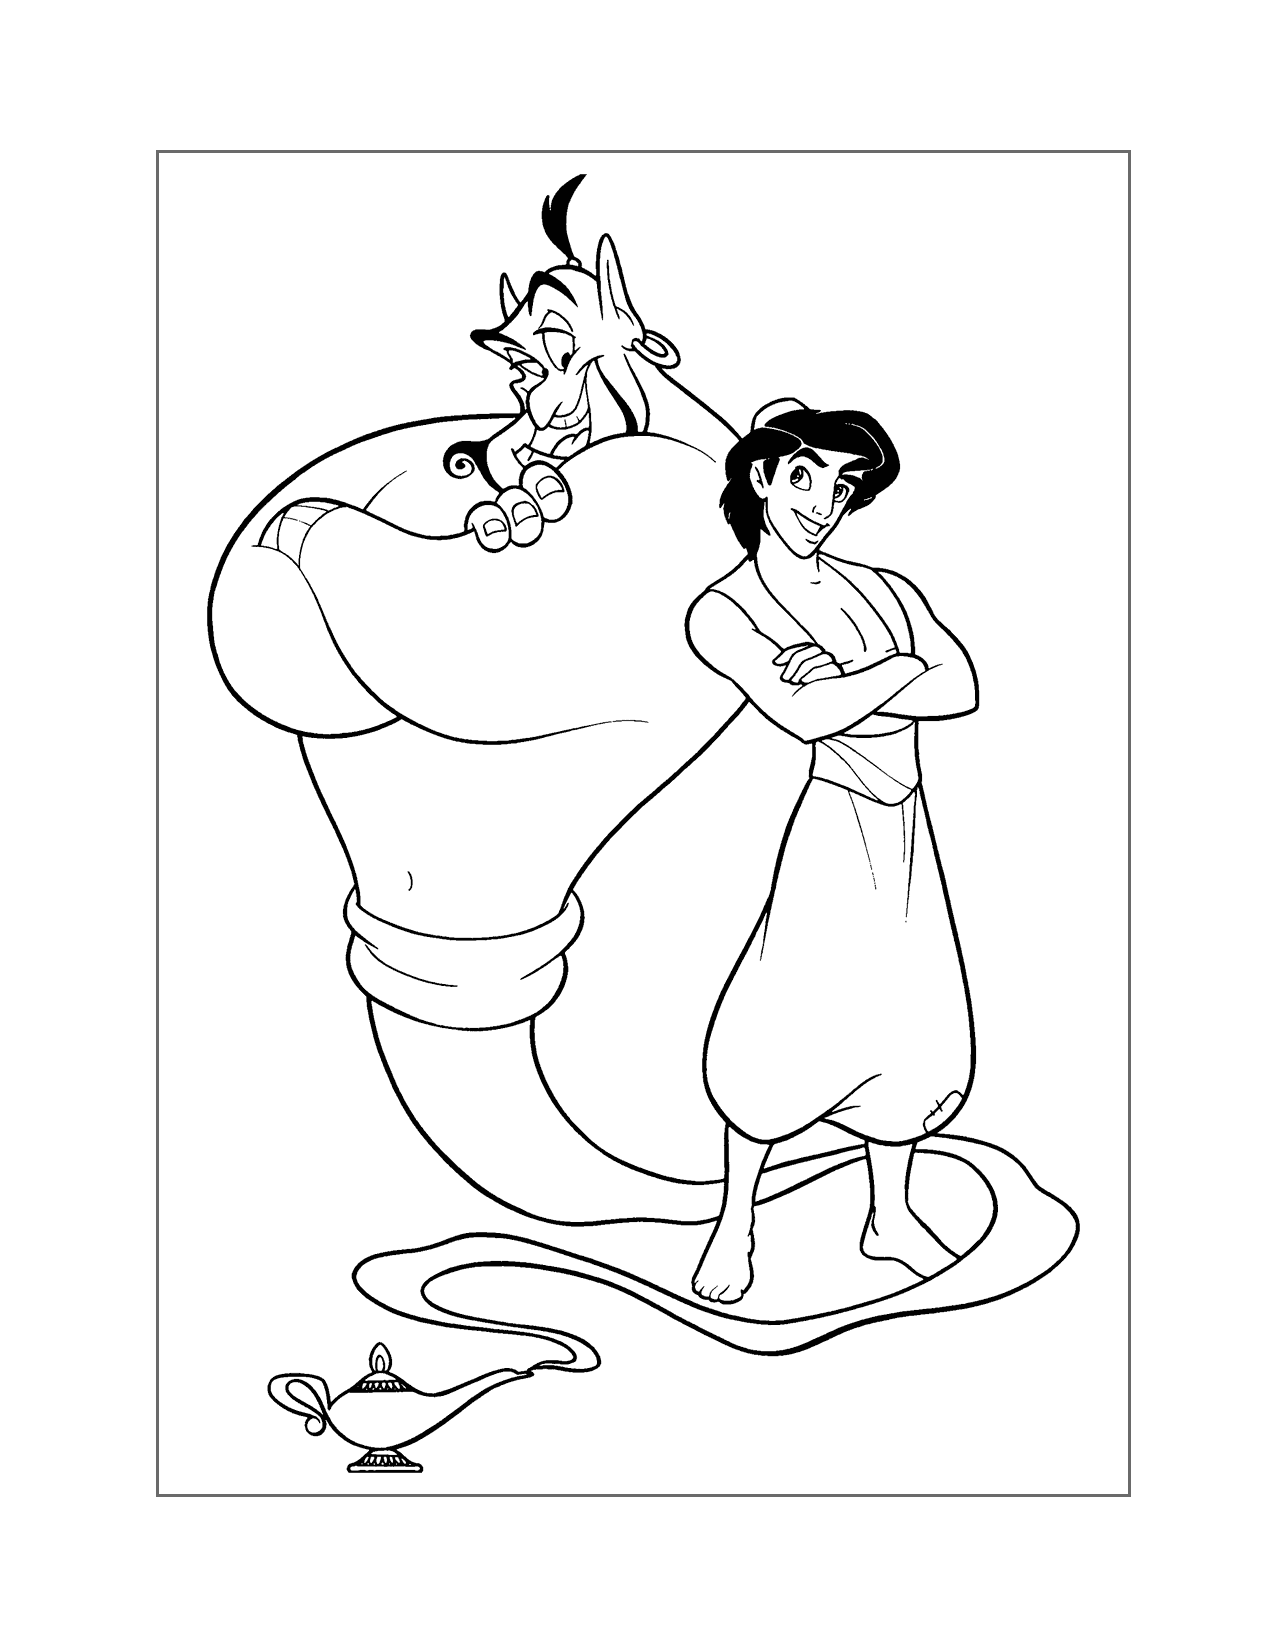 Aladdin And Genie Coloring Page